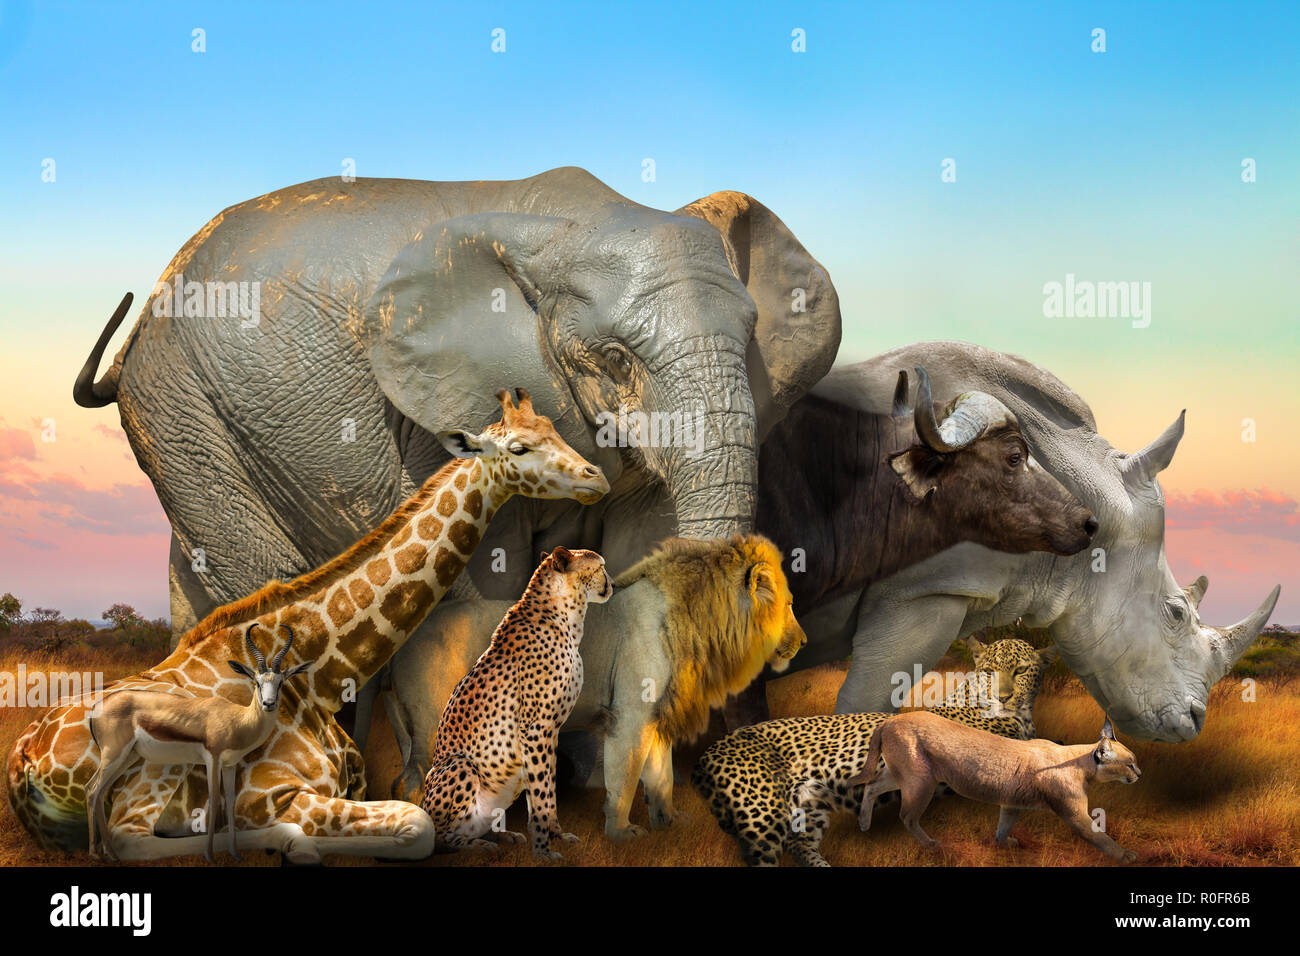 Side view of Big Five and wild african animals composition on savannah landscape at sunset light. Serengeti wildlife area in Tanzania, Africa. African safari scene. Wallpaper and collage background. Stock Photo